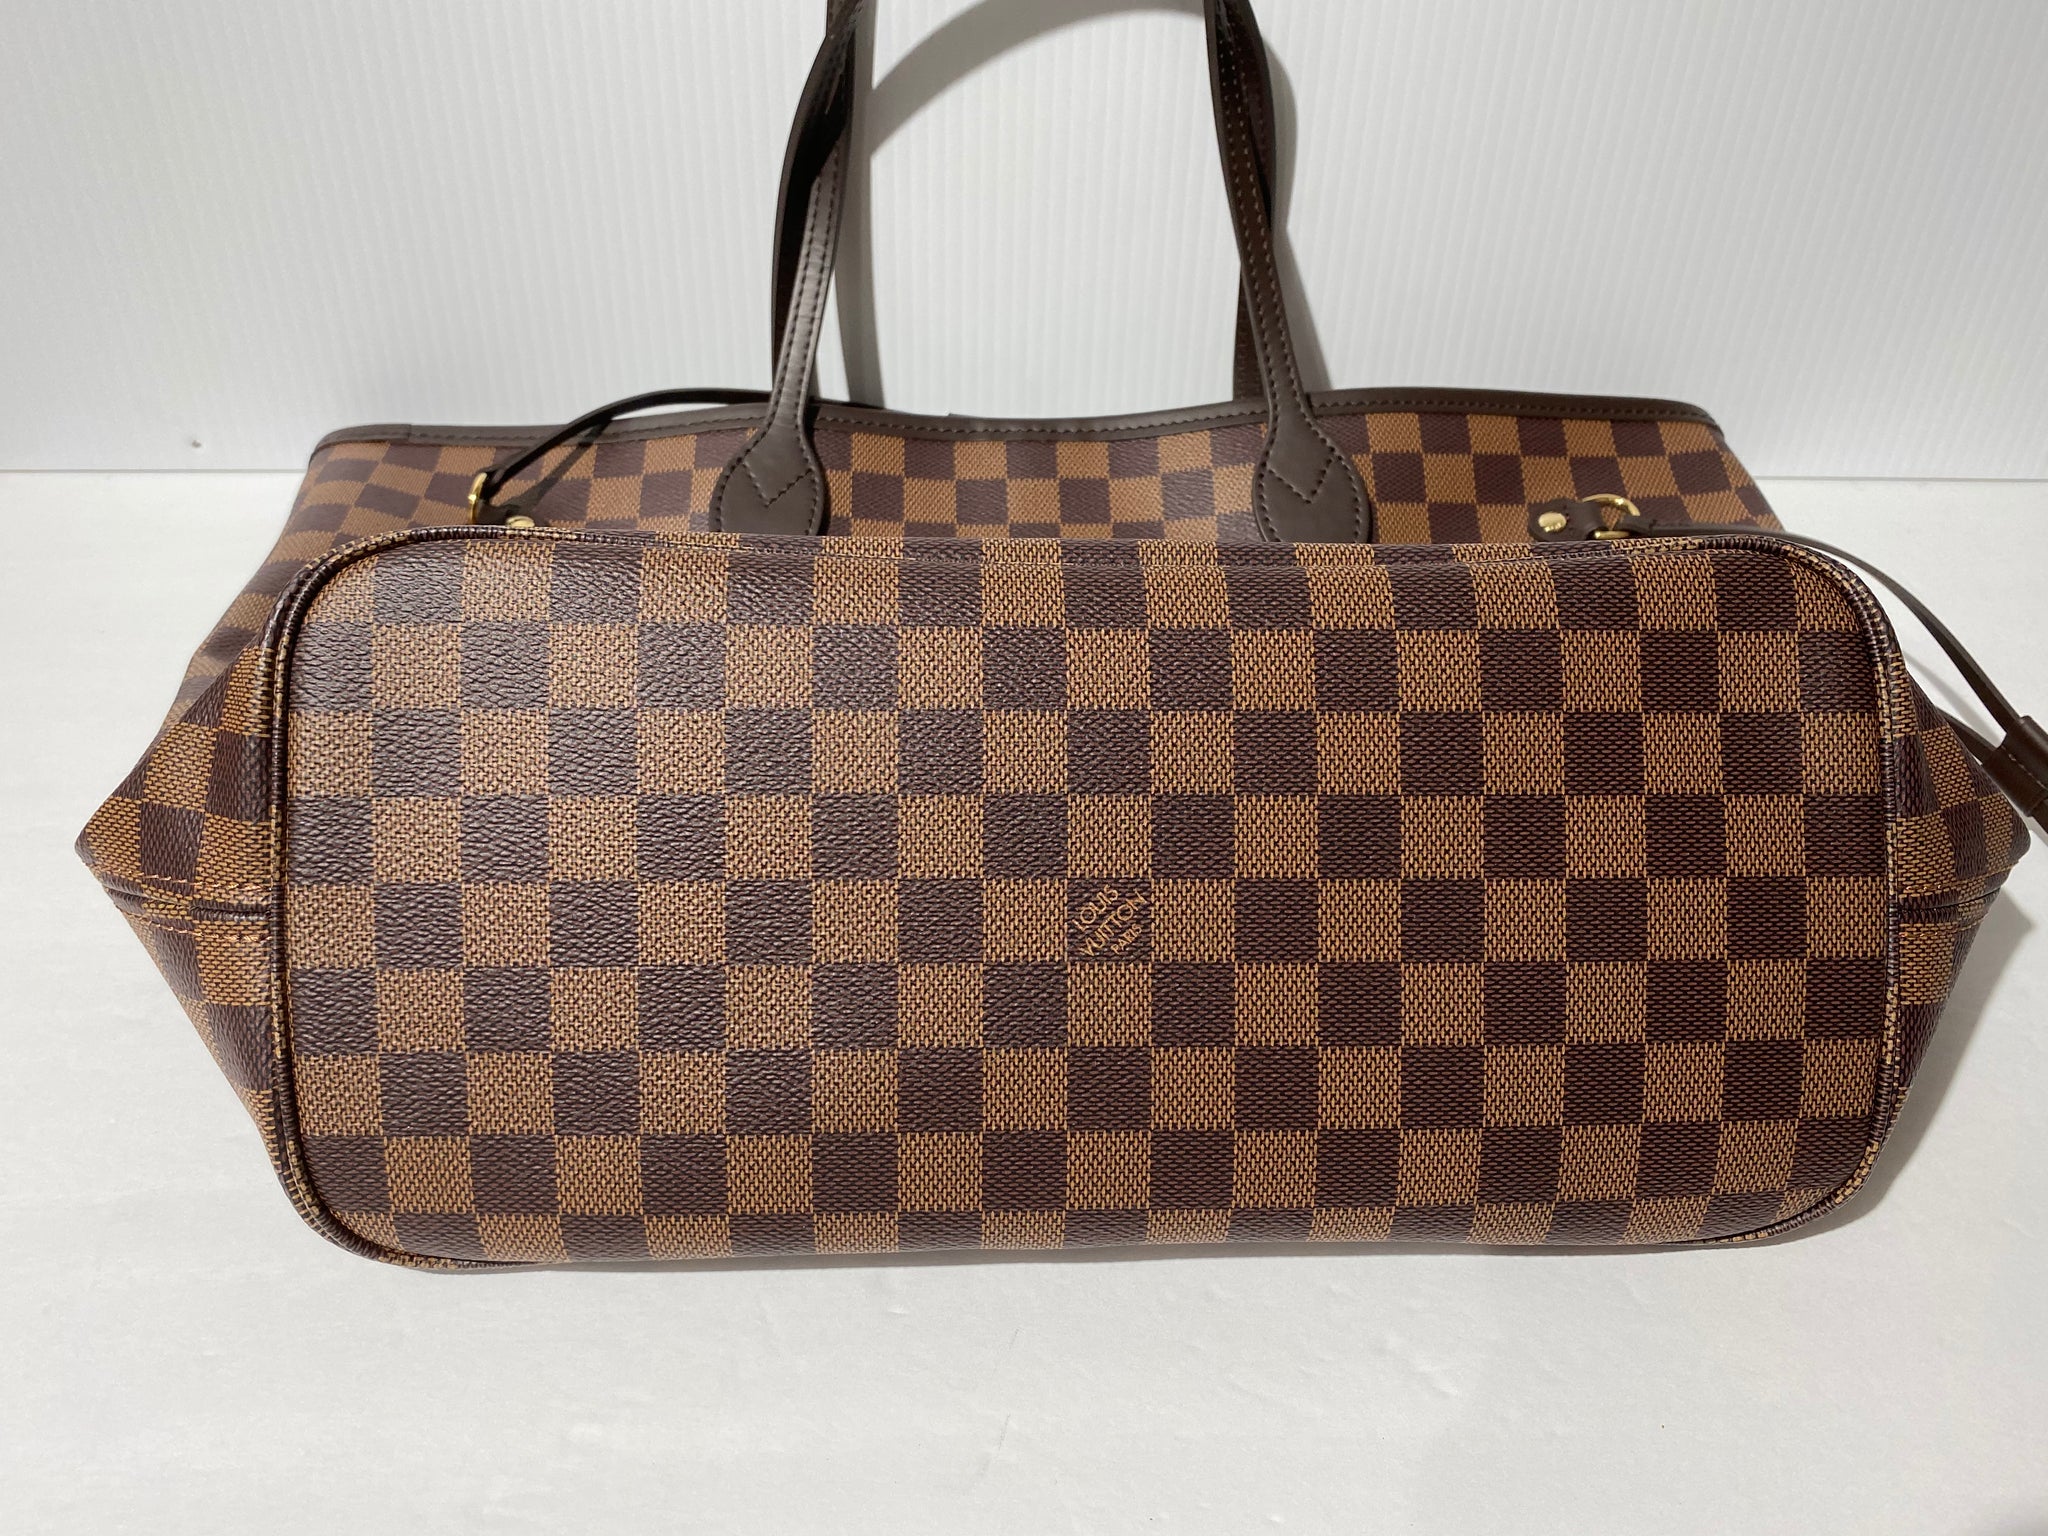 LV MM Neverfull. Fits basic everyday essentials and one 8 pound cat. :  r/handbags